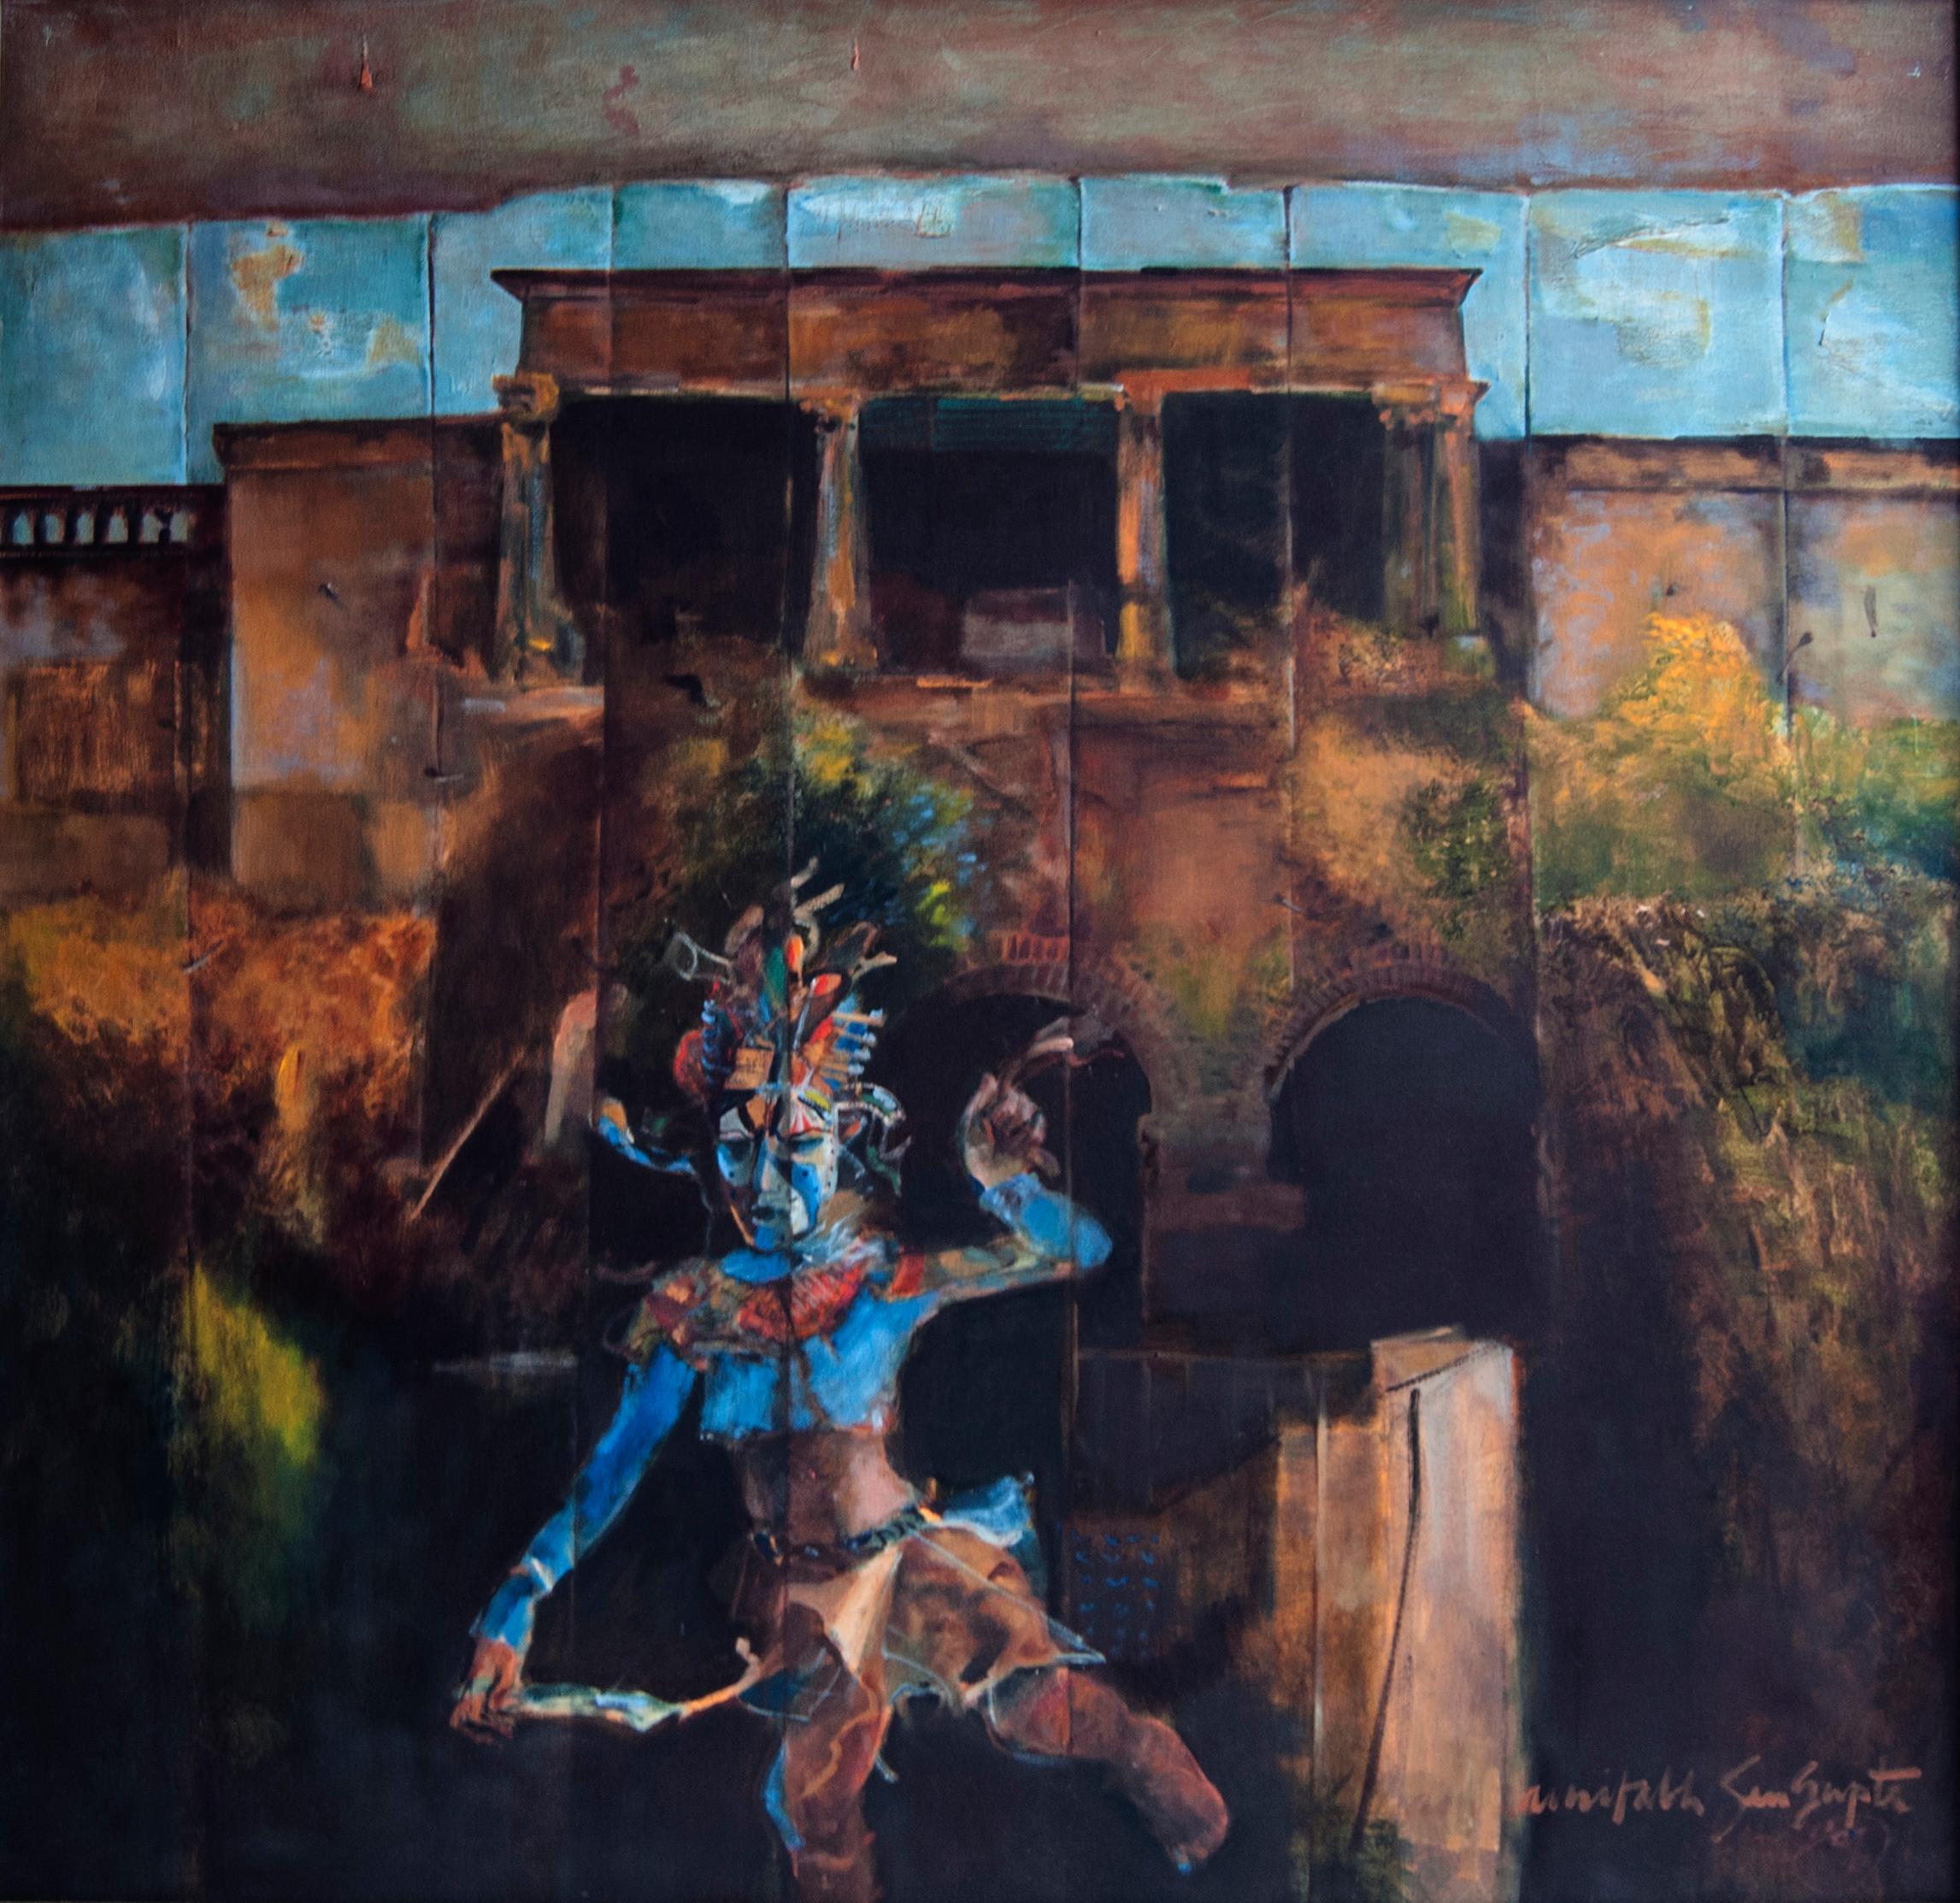 Amitabh Sengupta Abstract Painting - Void Dancer, Mythscape Series, Indian Art, Oil on canvas, Painting "In Stock"